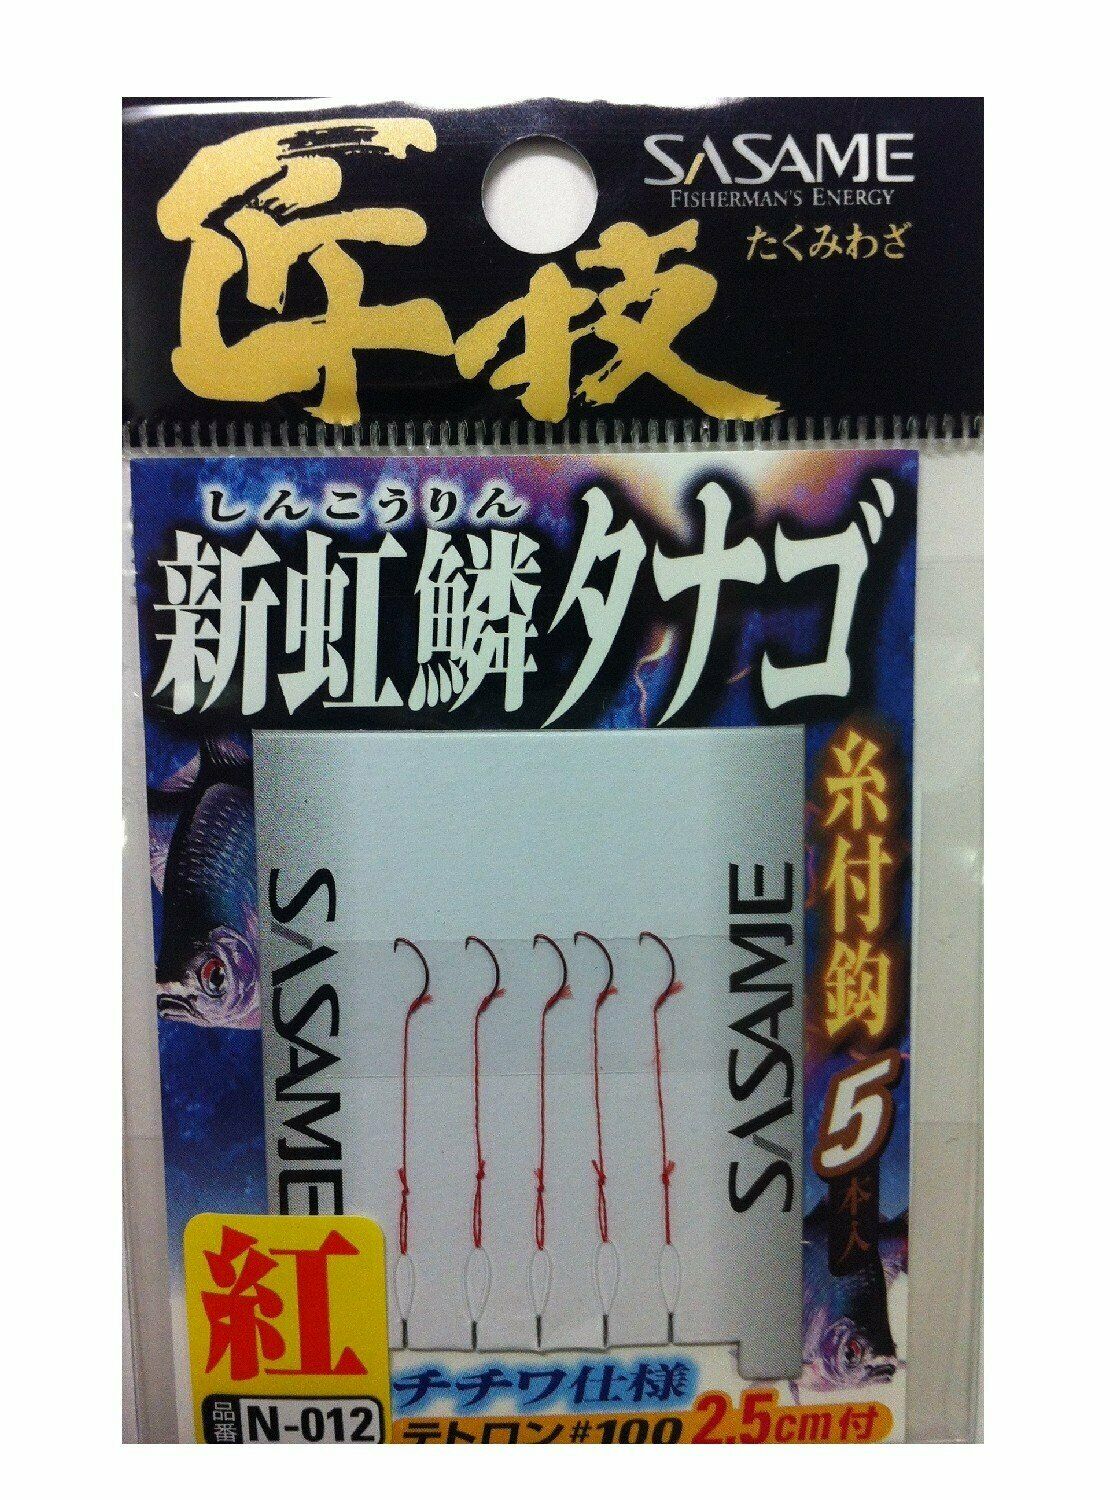 SASAME Red Snelled 2.5 cm Tanago Microfishing Hooks from Japan (5 pack)